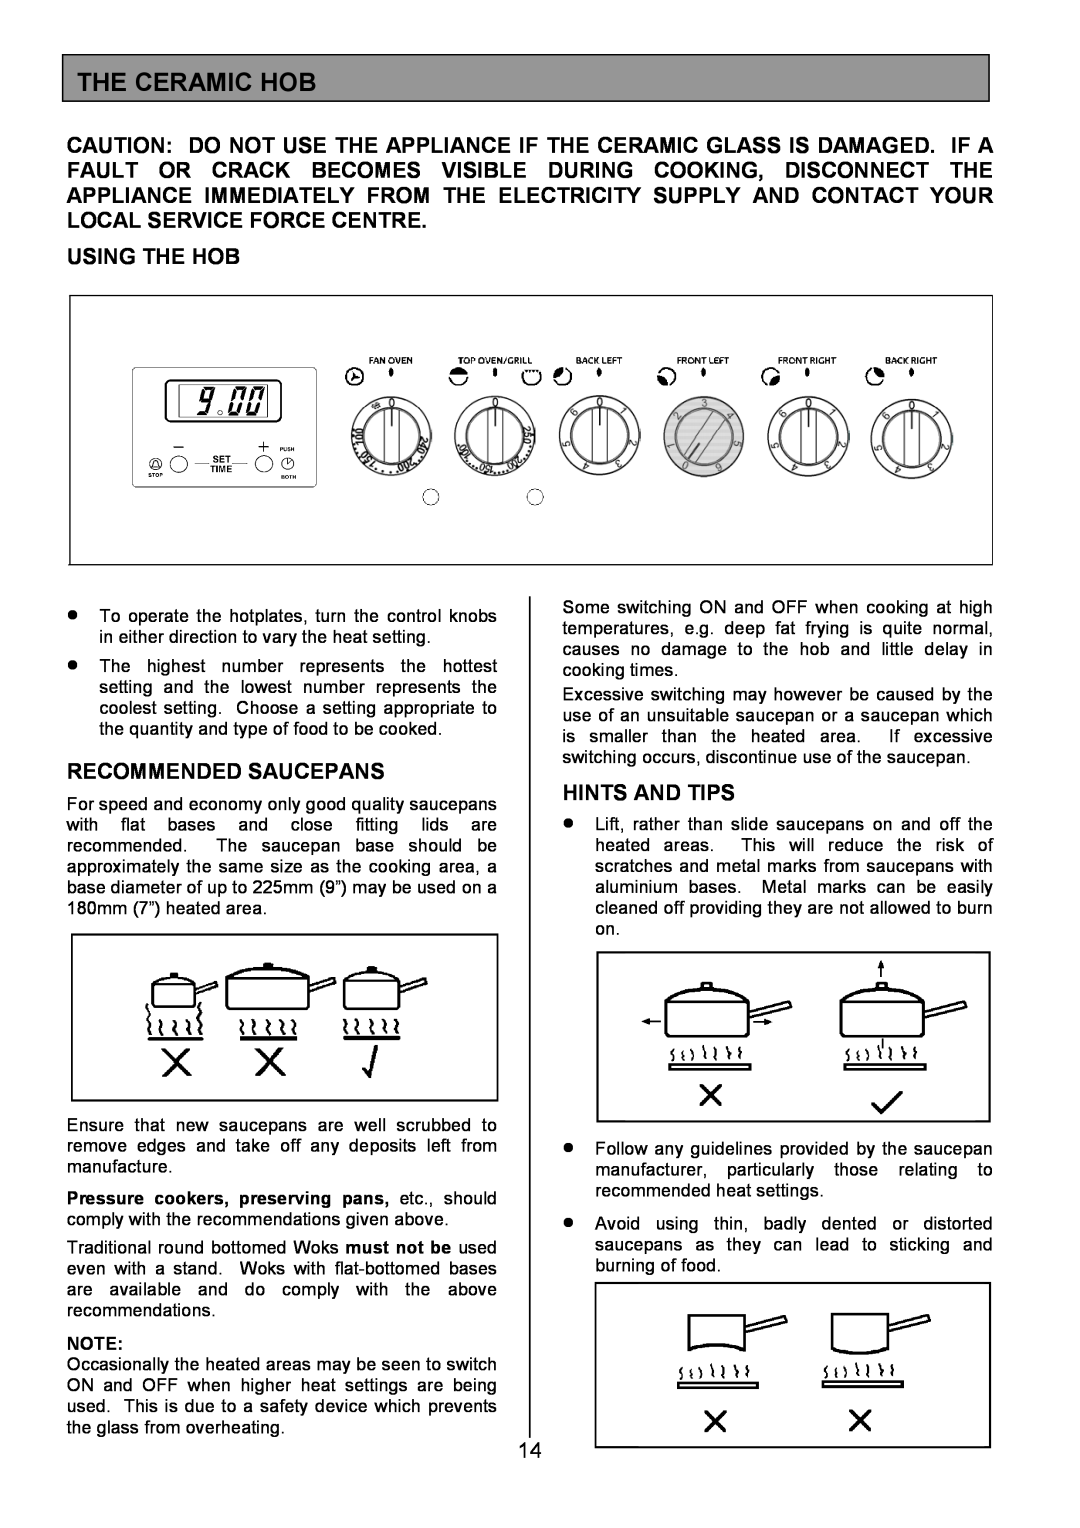 Tricity Bendix SE340 installation instructions The Ceramic Hob, Using The Hob, Recommended Saucepans, Hints And Tips 